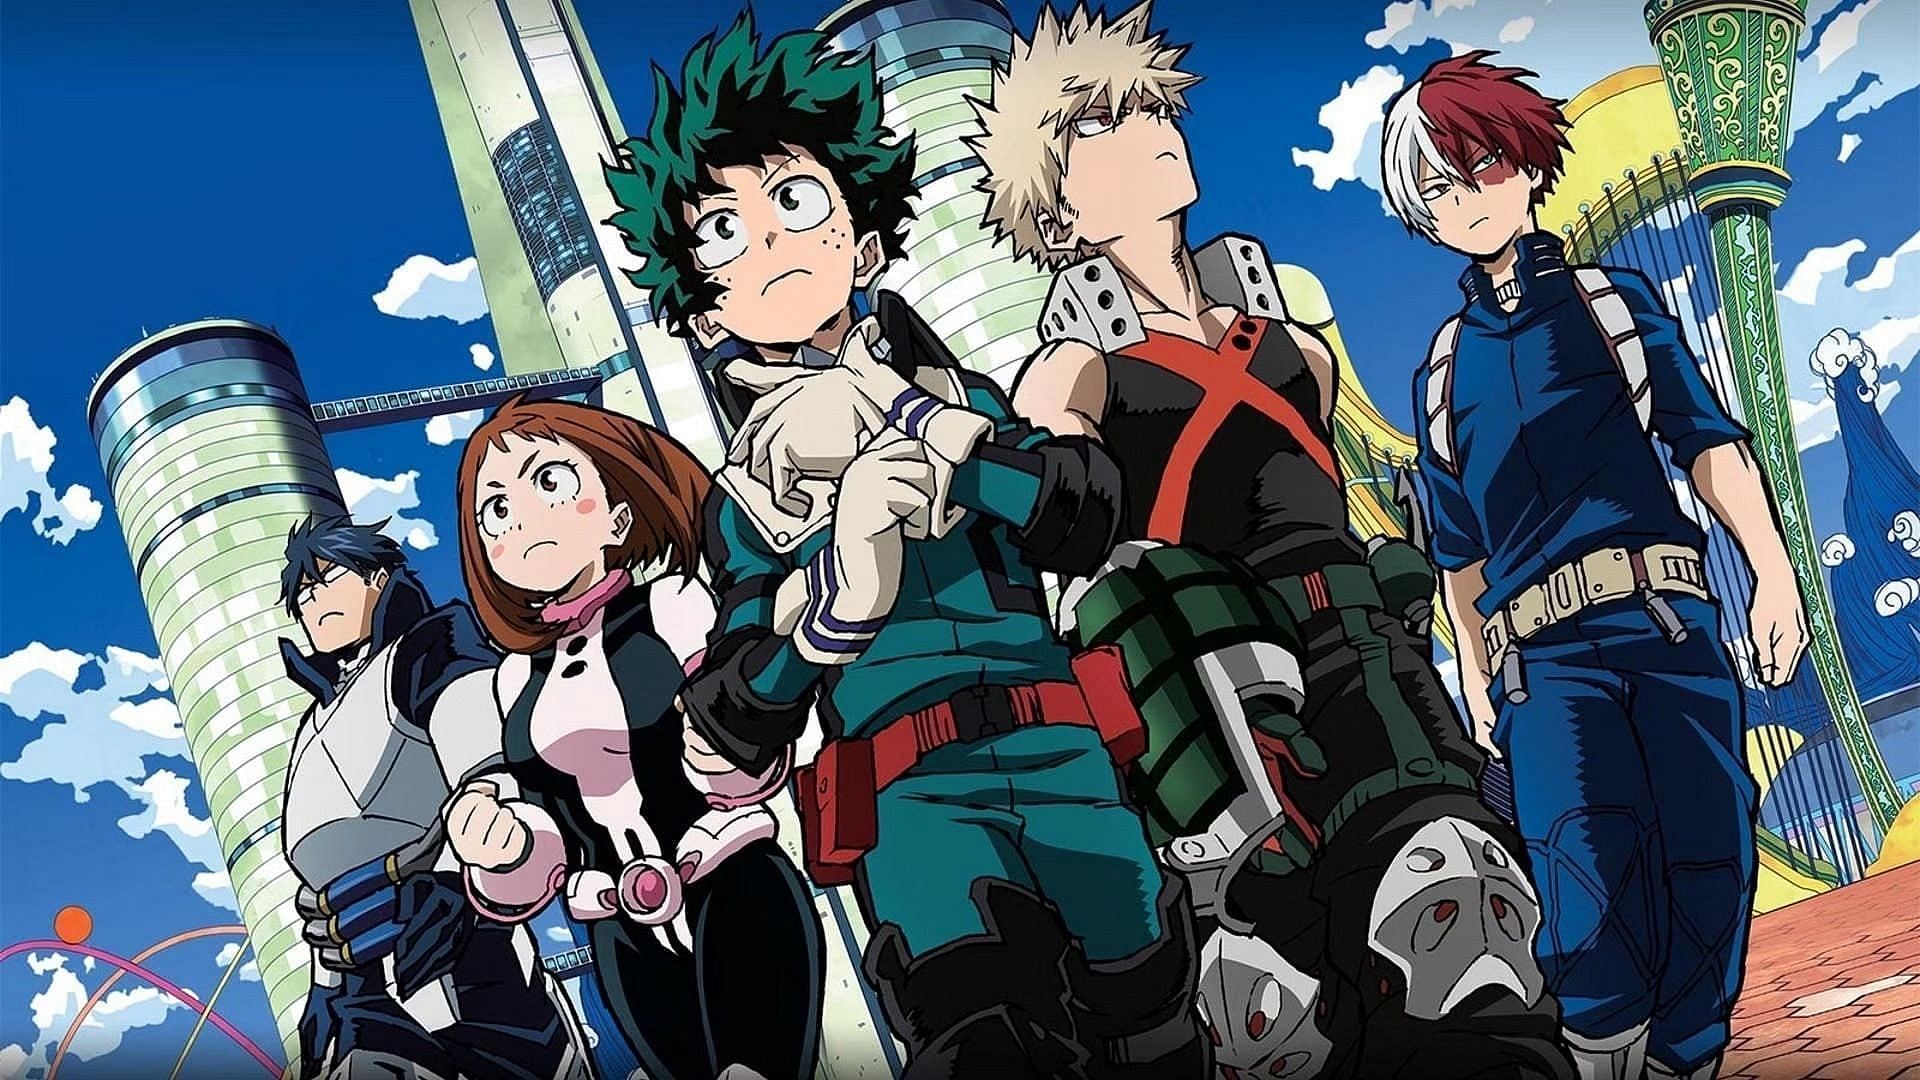 All 10 Class 1-A students who didn